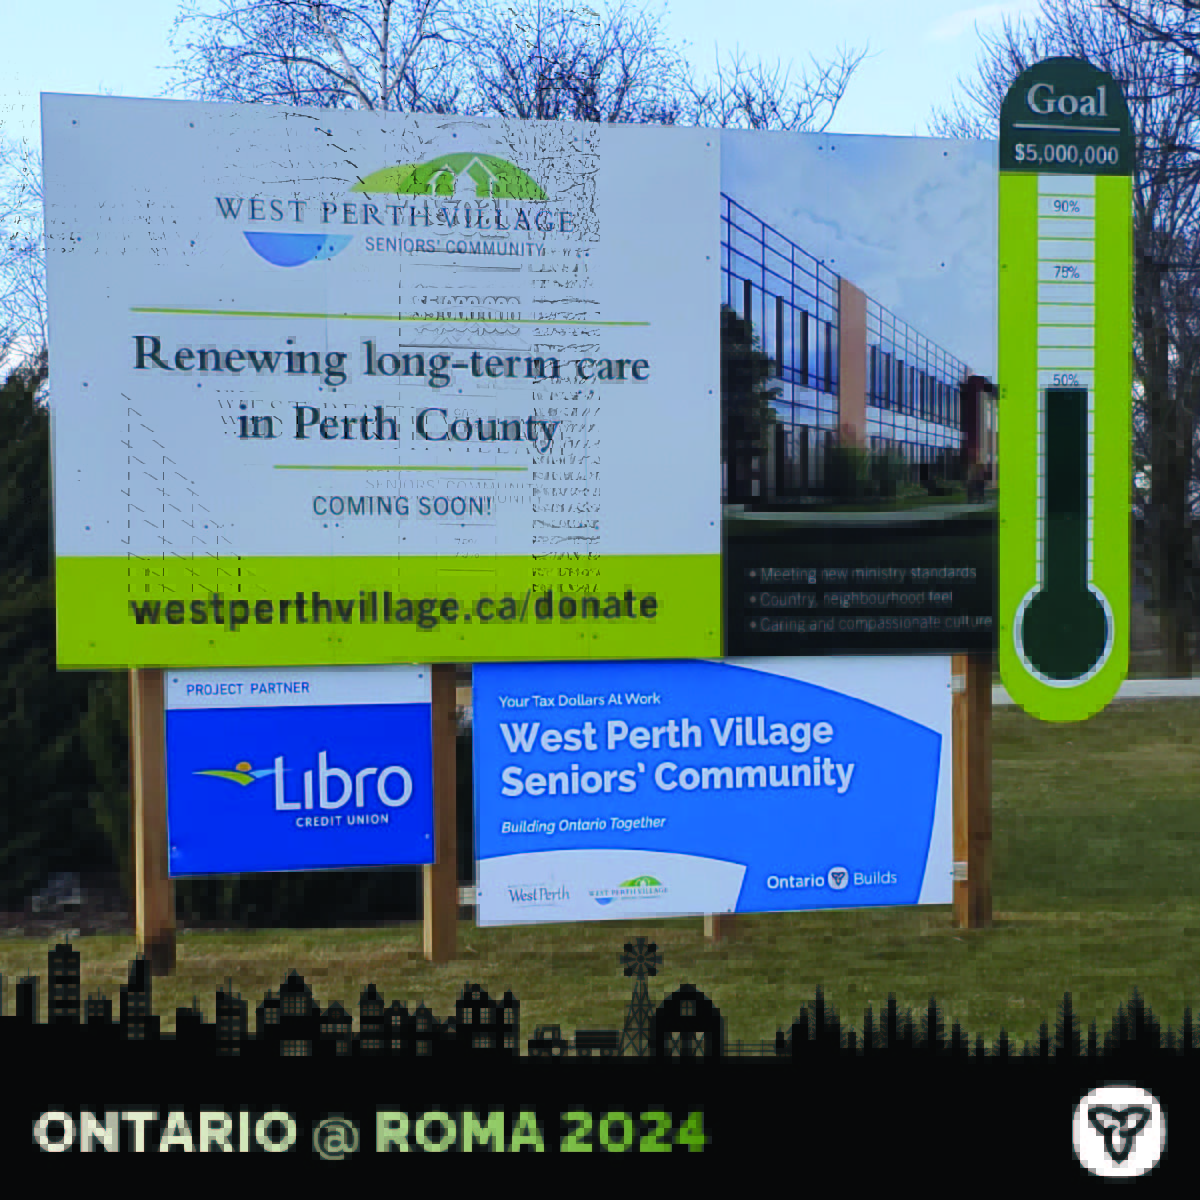 We recently celebrated the opening of West Perth Village, a new #LongTermCare home that brings 128 new, much-needed beds to the community of Mitchell. news.ontario.ca/en/release/100… #ROMA2024